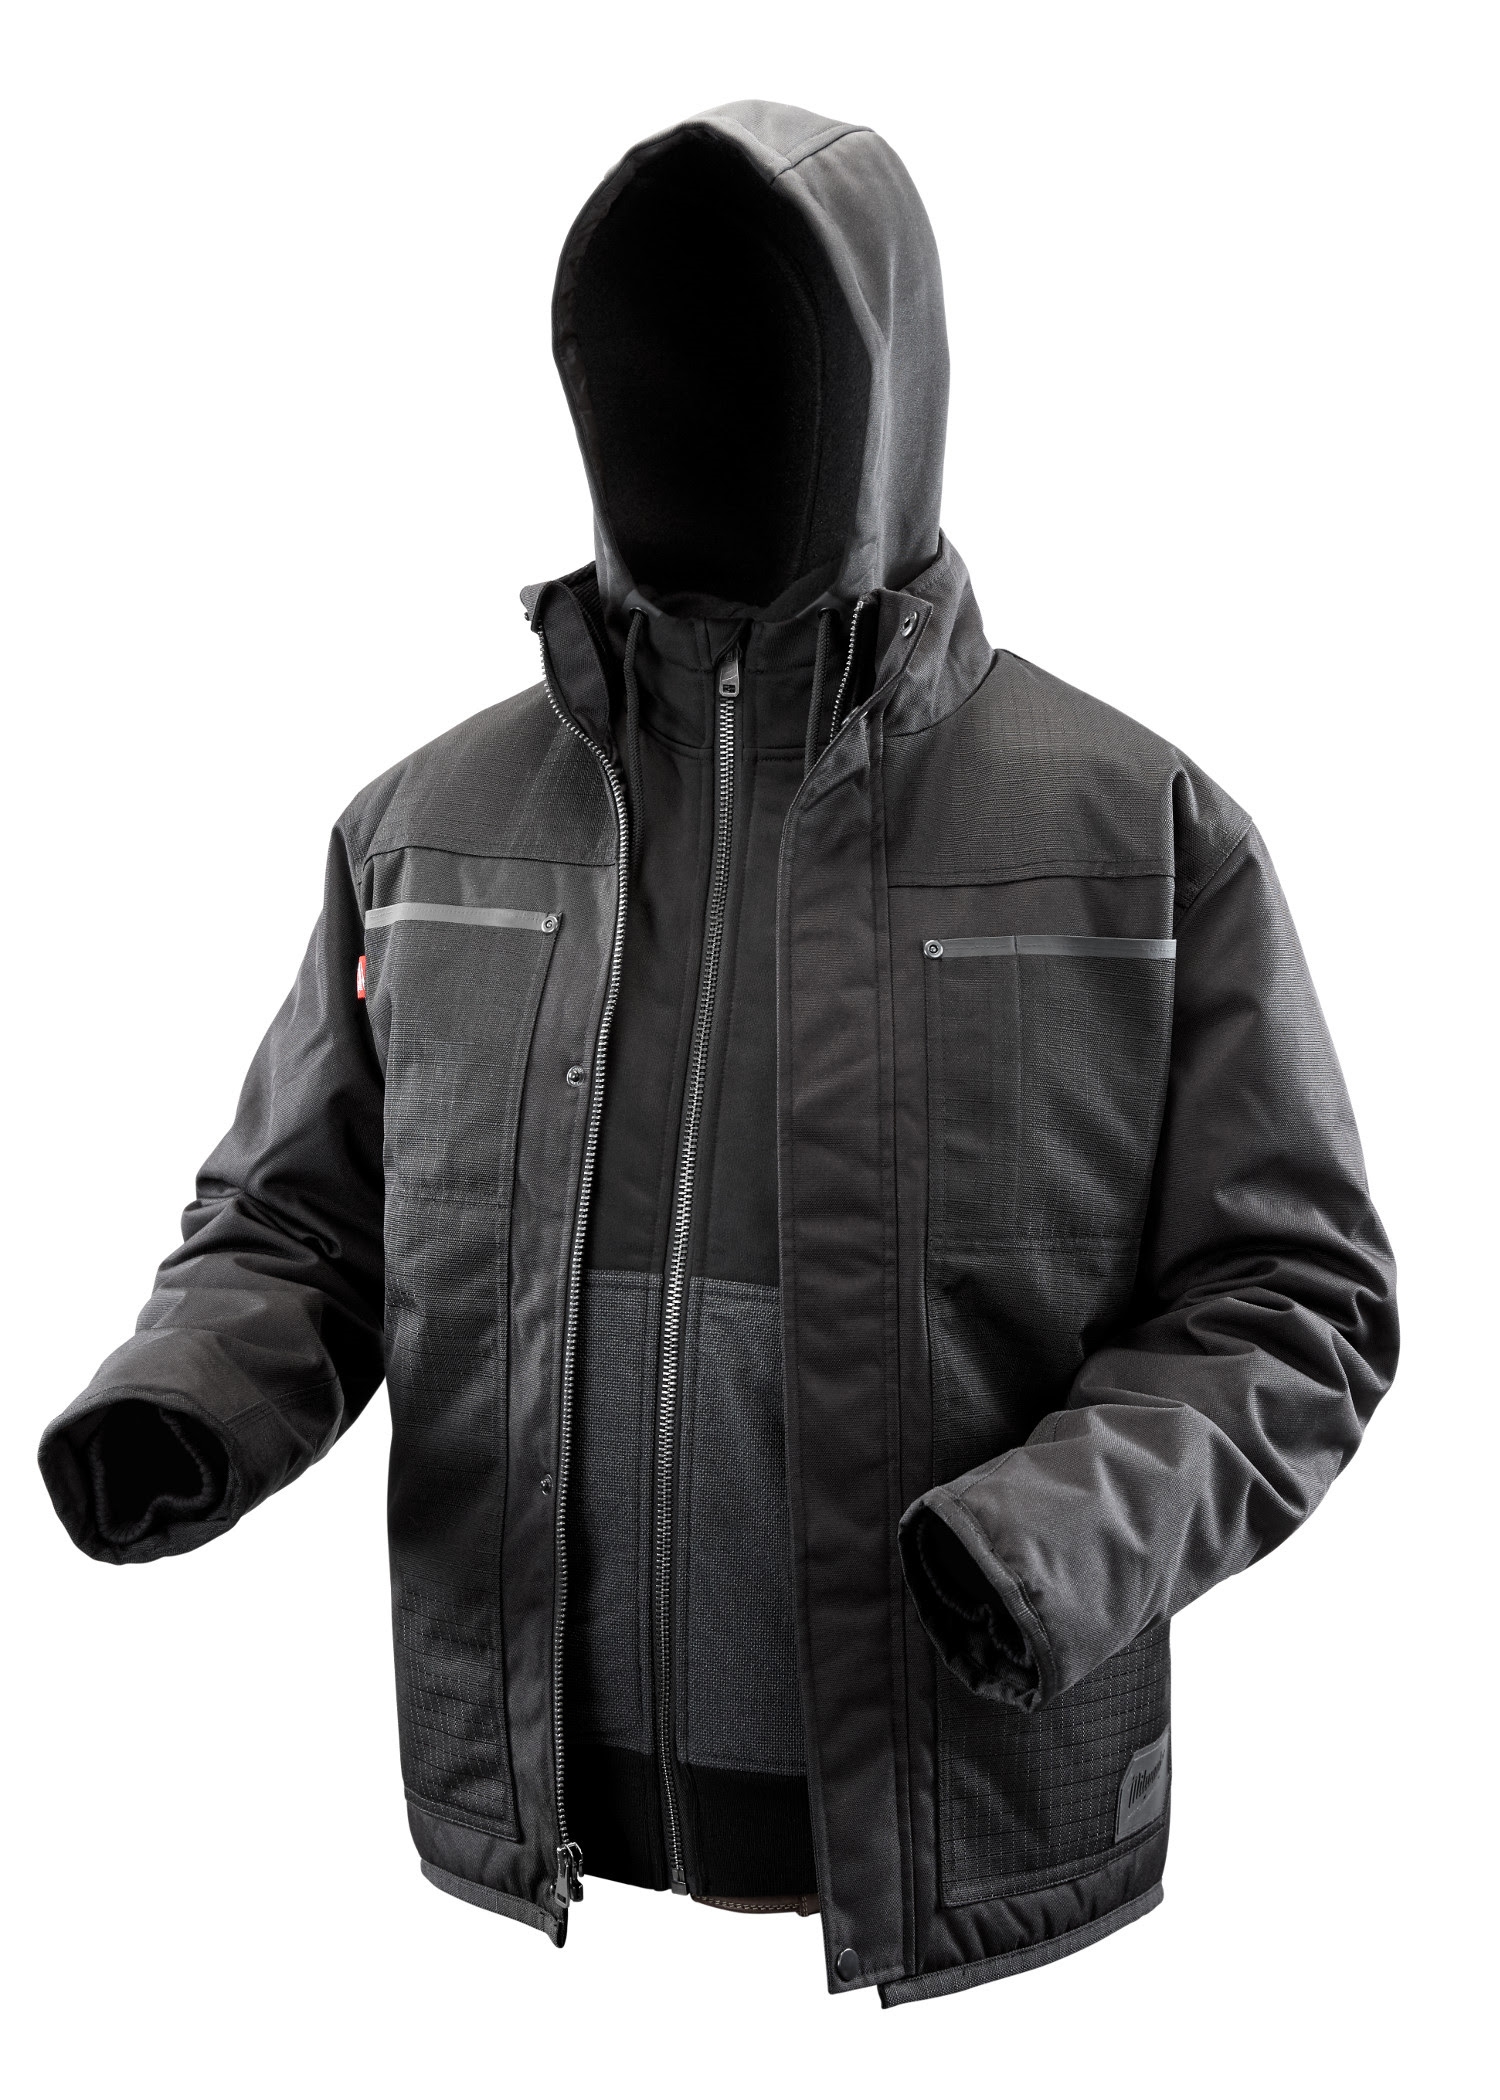 M12 3in1 Heated Ripstop Jacket